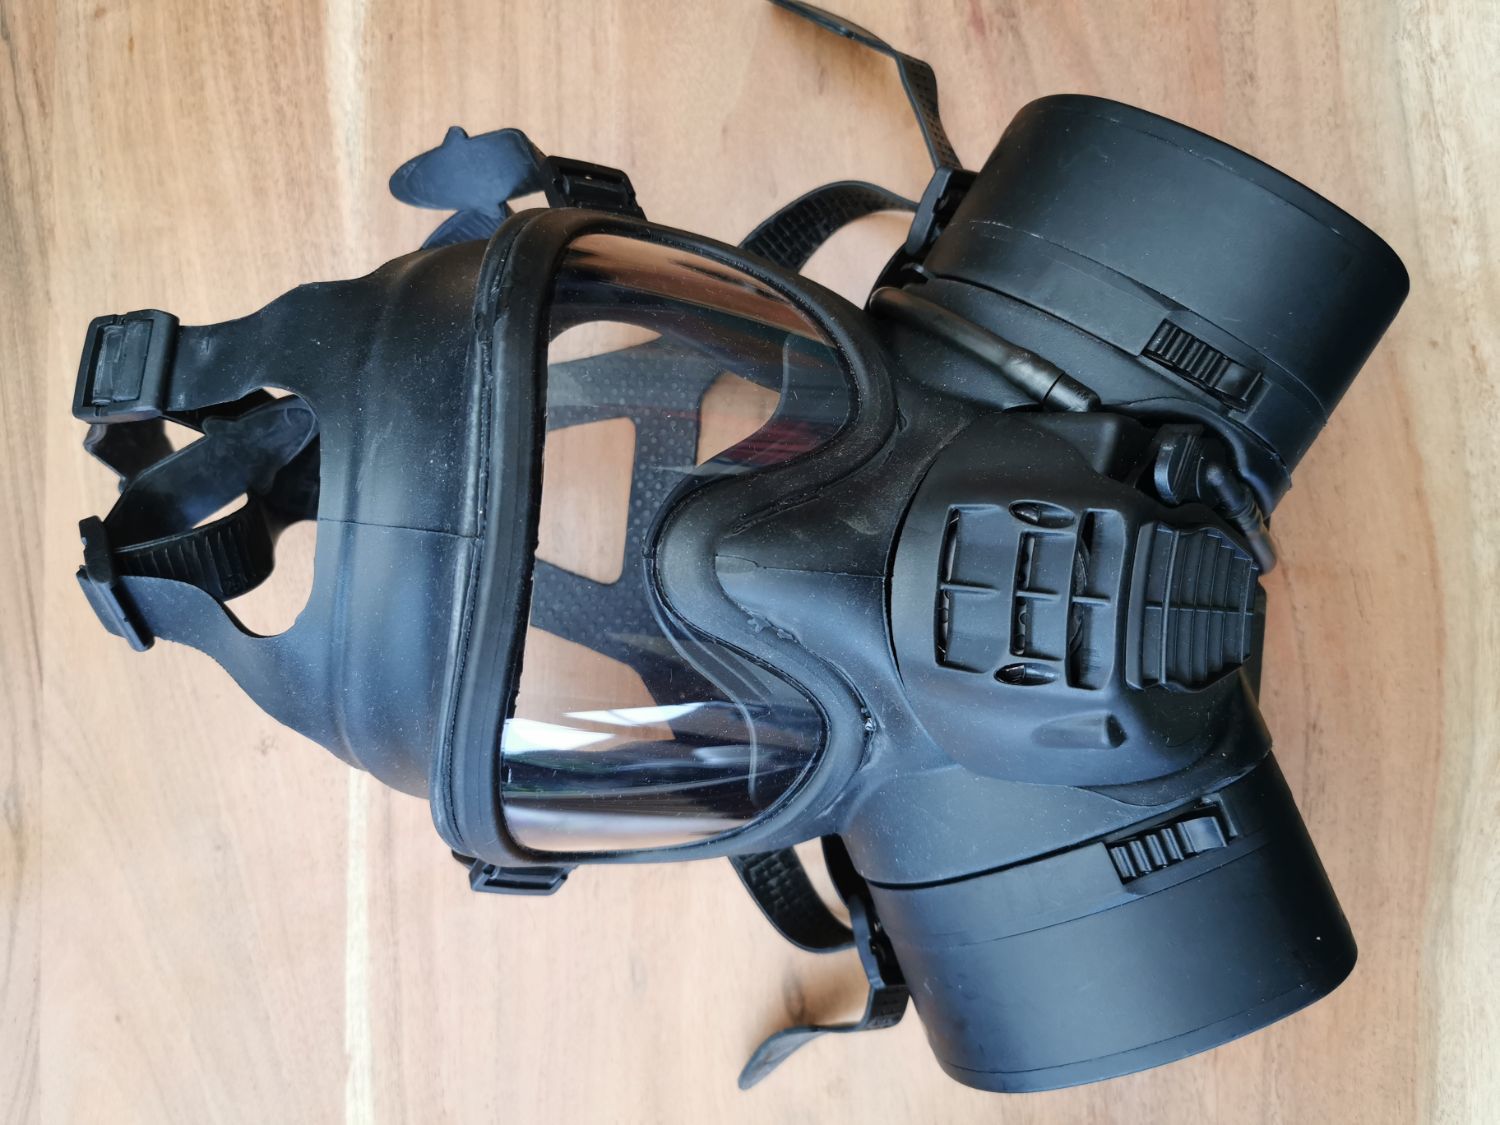 Scott GSR respirator with filters size 3 - Gear - Airsoft Forums UK